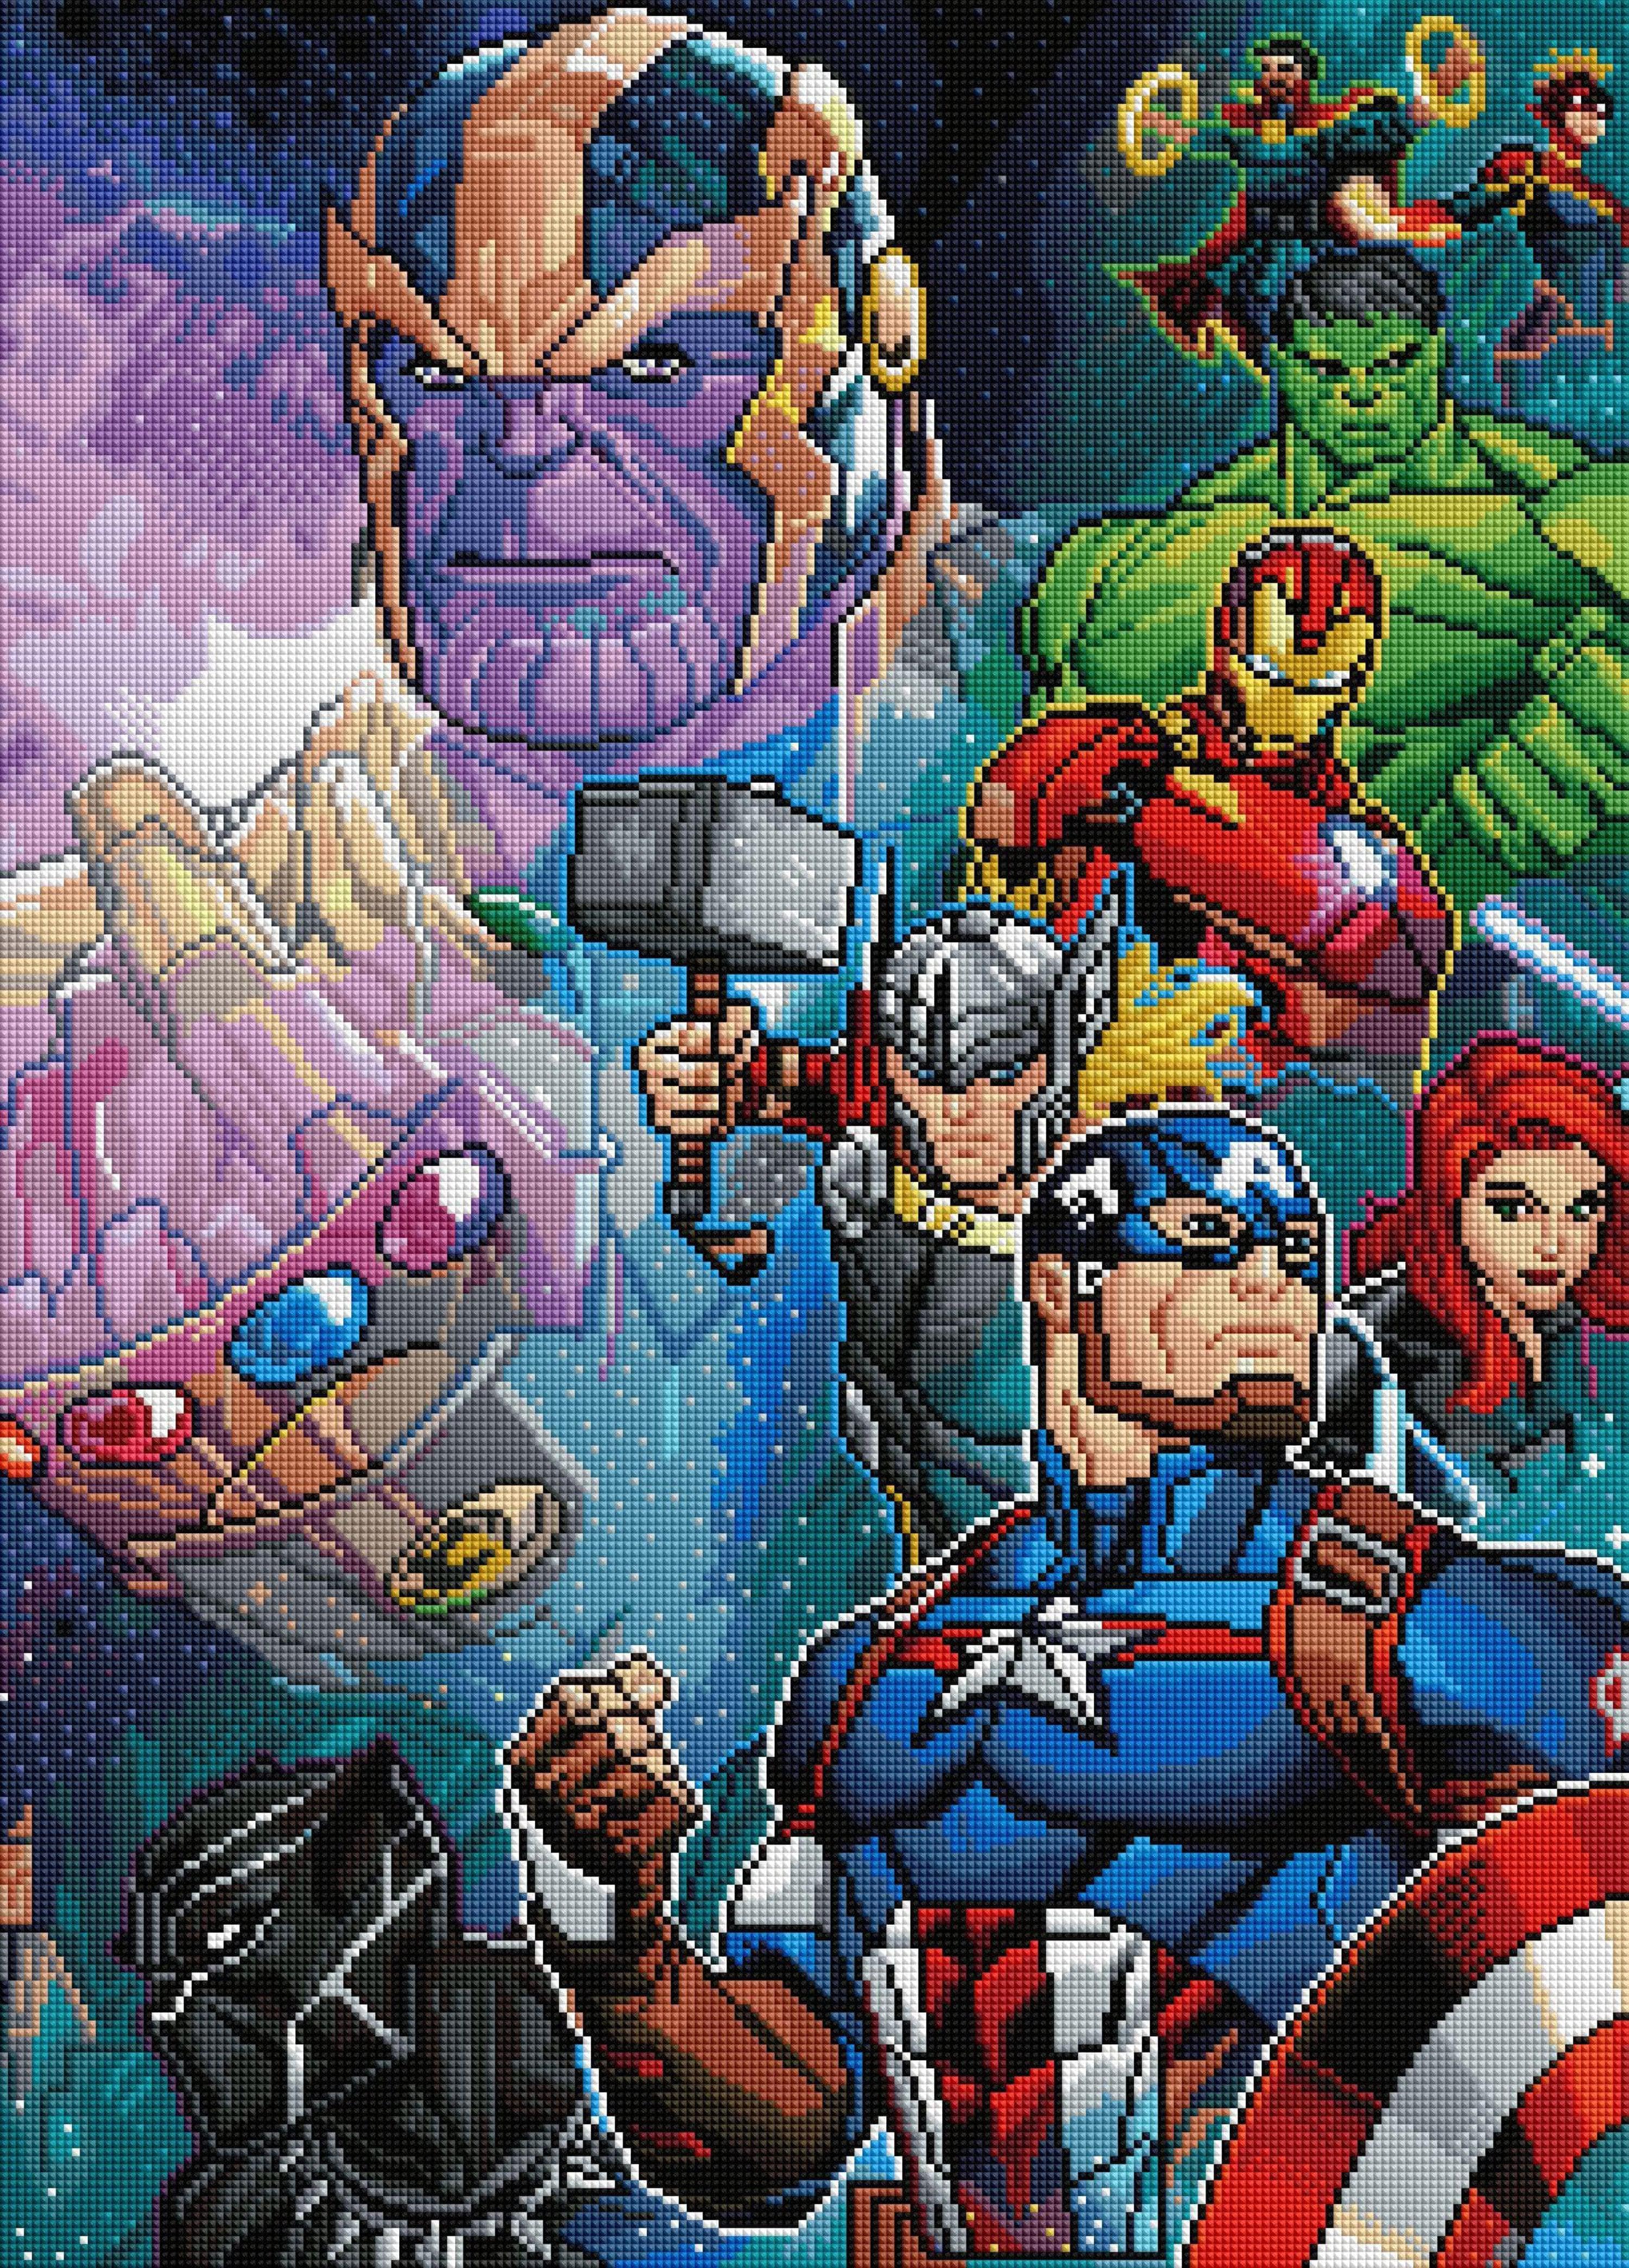 MARVEL-ous May Event Kick-off! A Diamond Painting Event in Partnership with  Diamond Art Club 